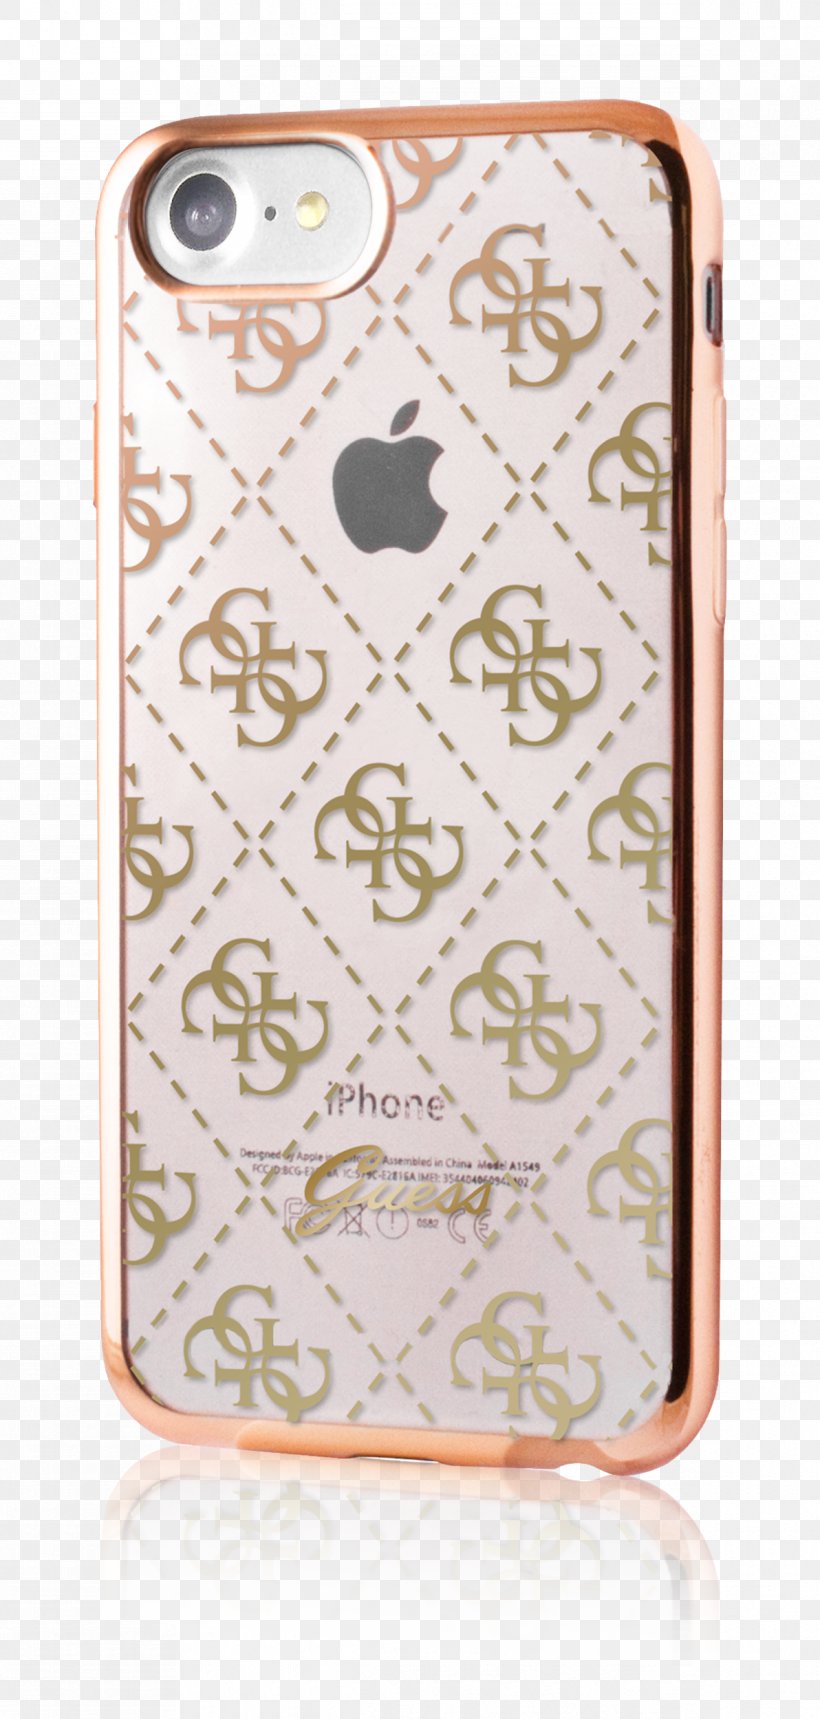 IPhone 6S Apple IPhone 8 Plus Apple IPhone 7 Plus IPhone 6 Plus, PNG, 1192x2500px, Iphone 6, Apple Iphone 7 Plus, Apple Iphone 8 Plus, Case, Gold Download Free